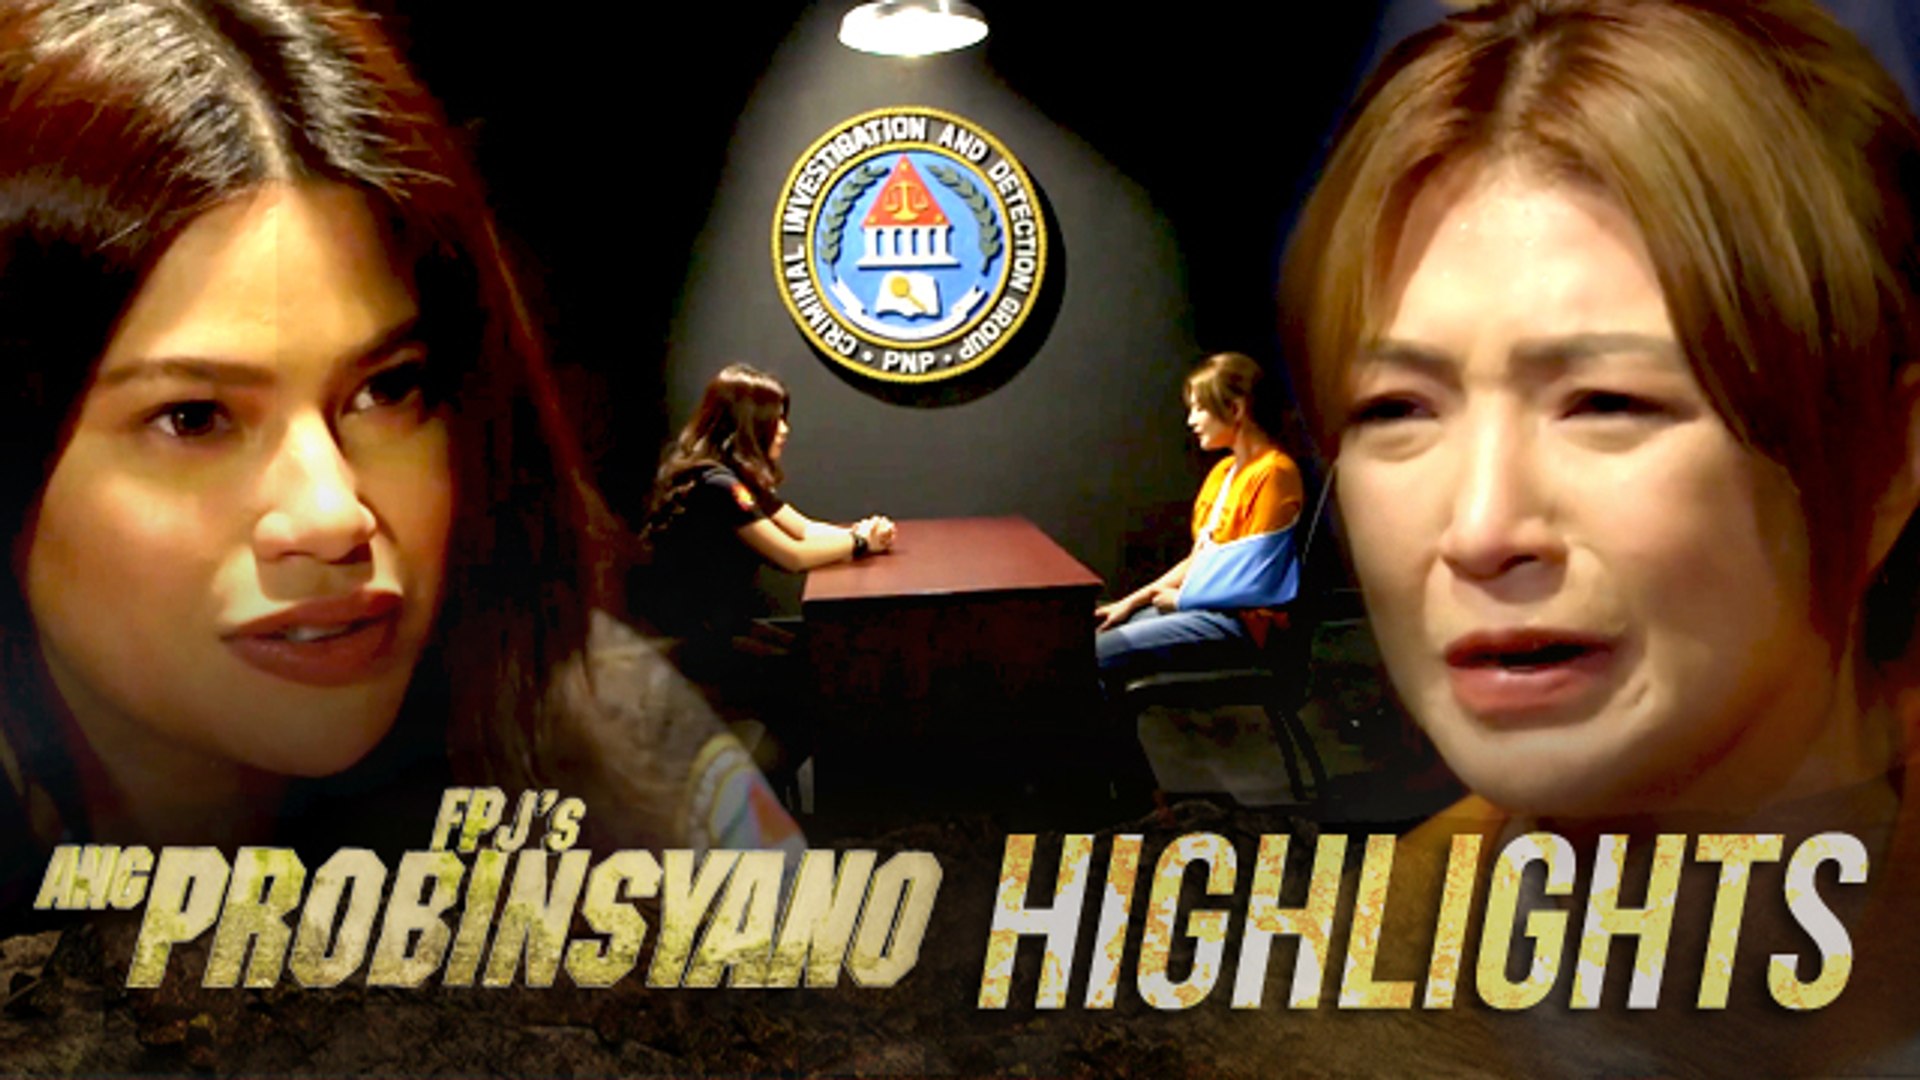 Chloe covers up Jacob's crime from the police | FPJ's Ang Probinsyano